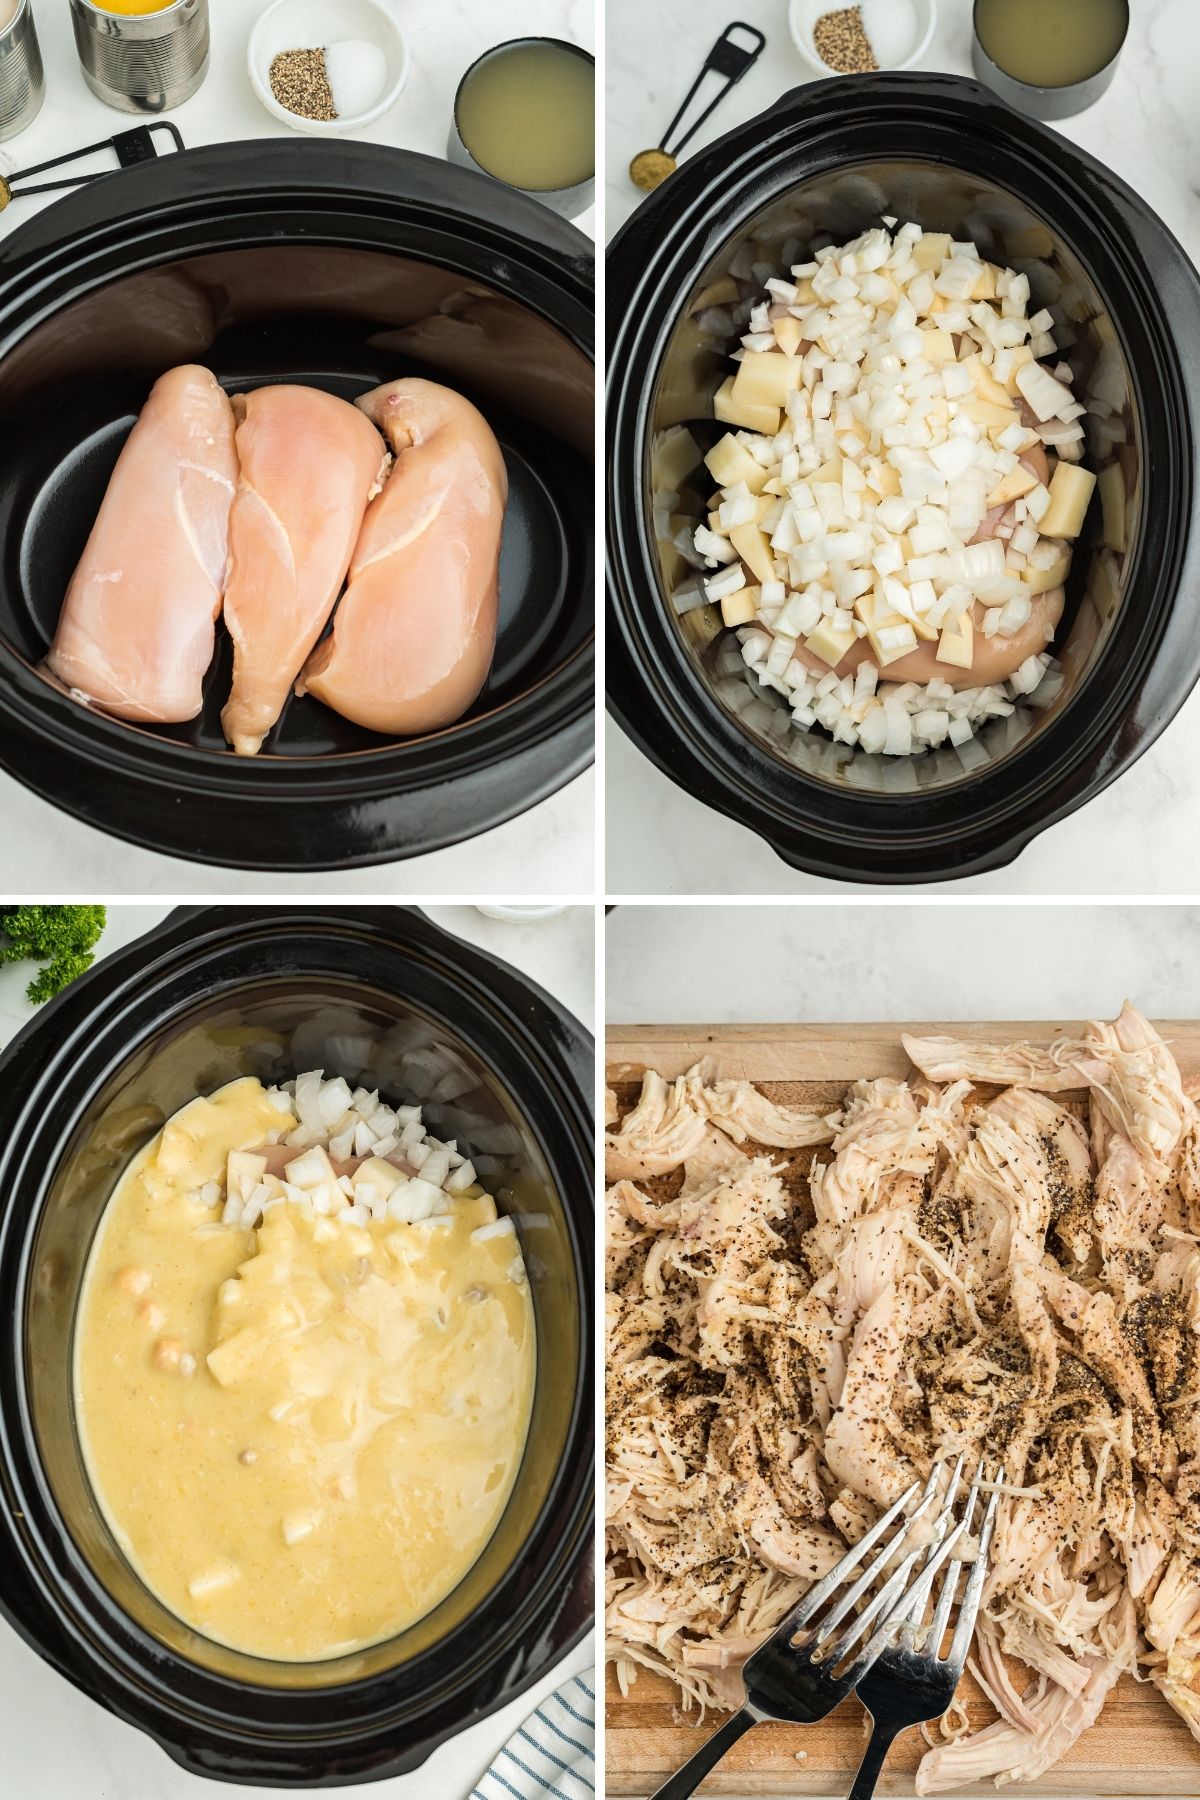 four photos: raw chicken in crockpot; added diced potatoes and onions; topped with soup; shredded chicken on cutting board